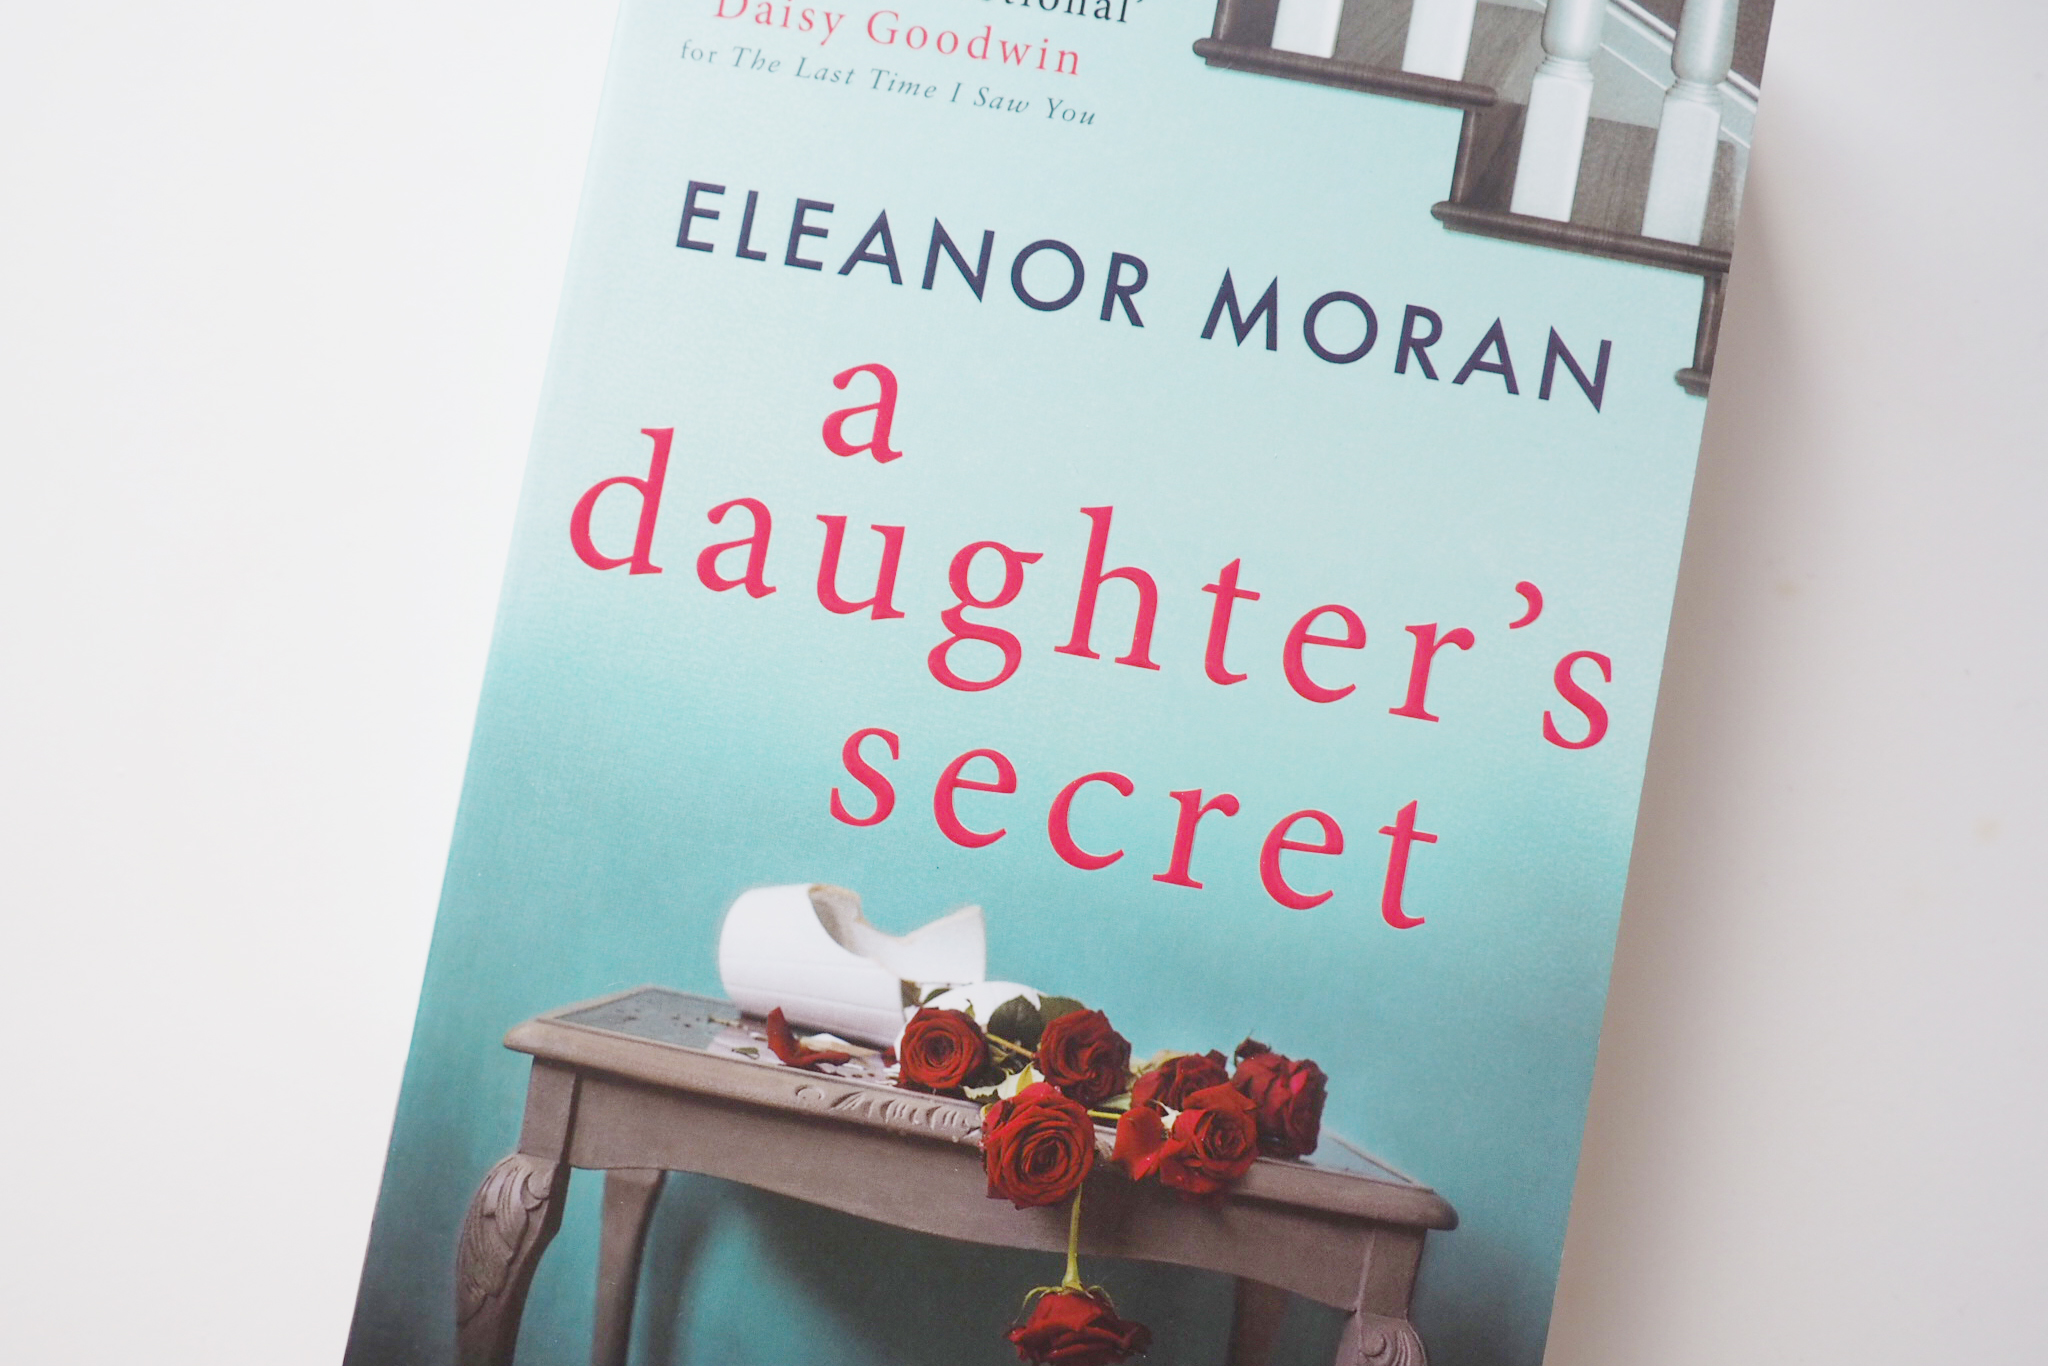 A Daughter's Secret - Eleanor Moran | Recently Read #2 - lazythoughts.co.uk